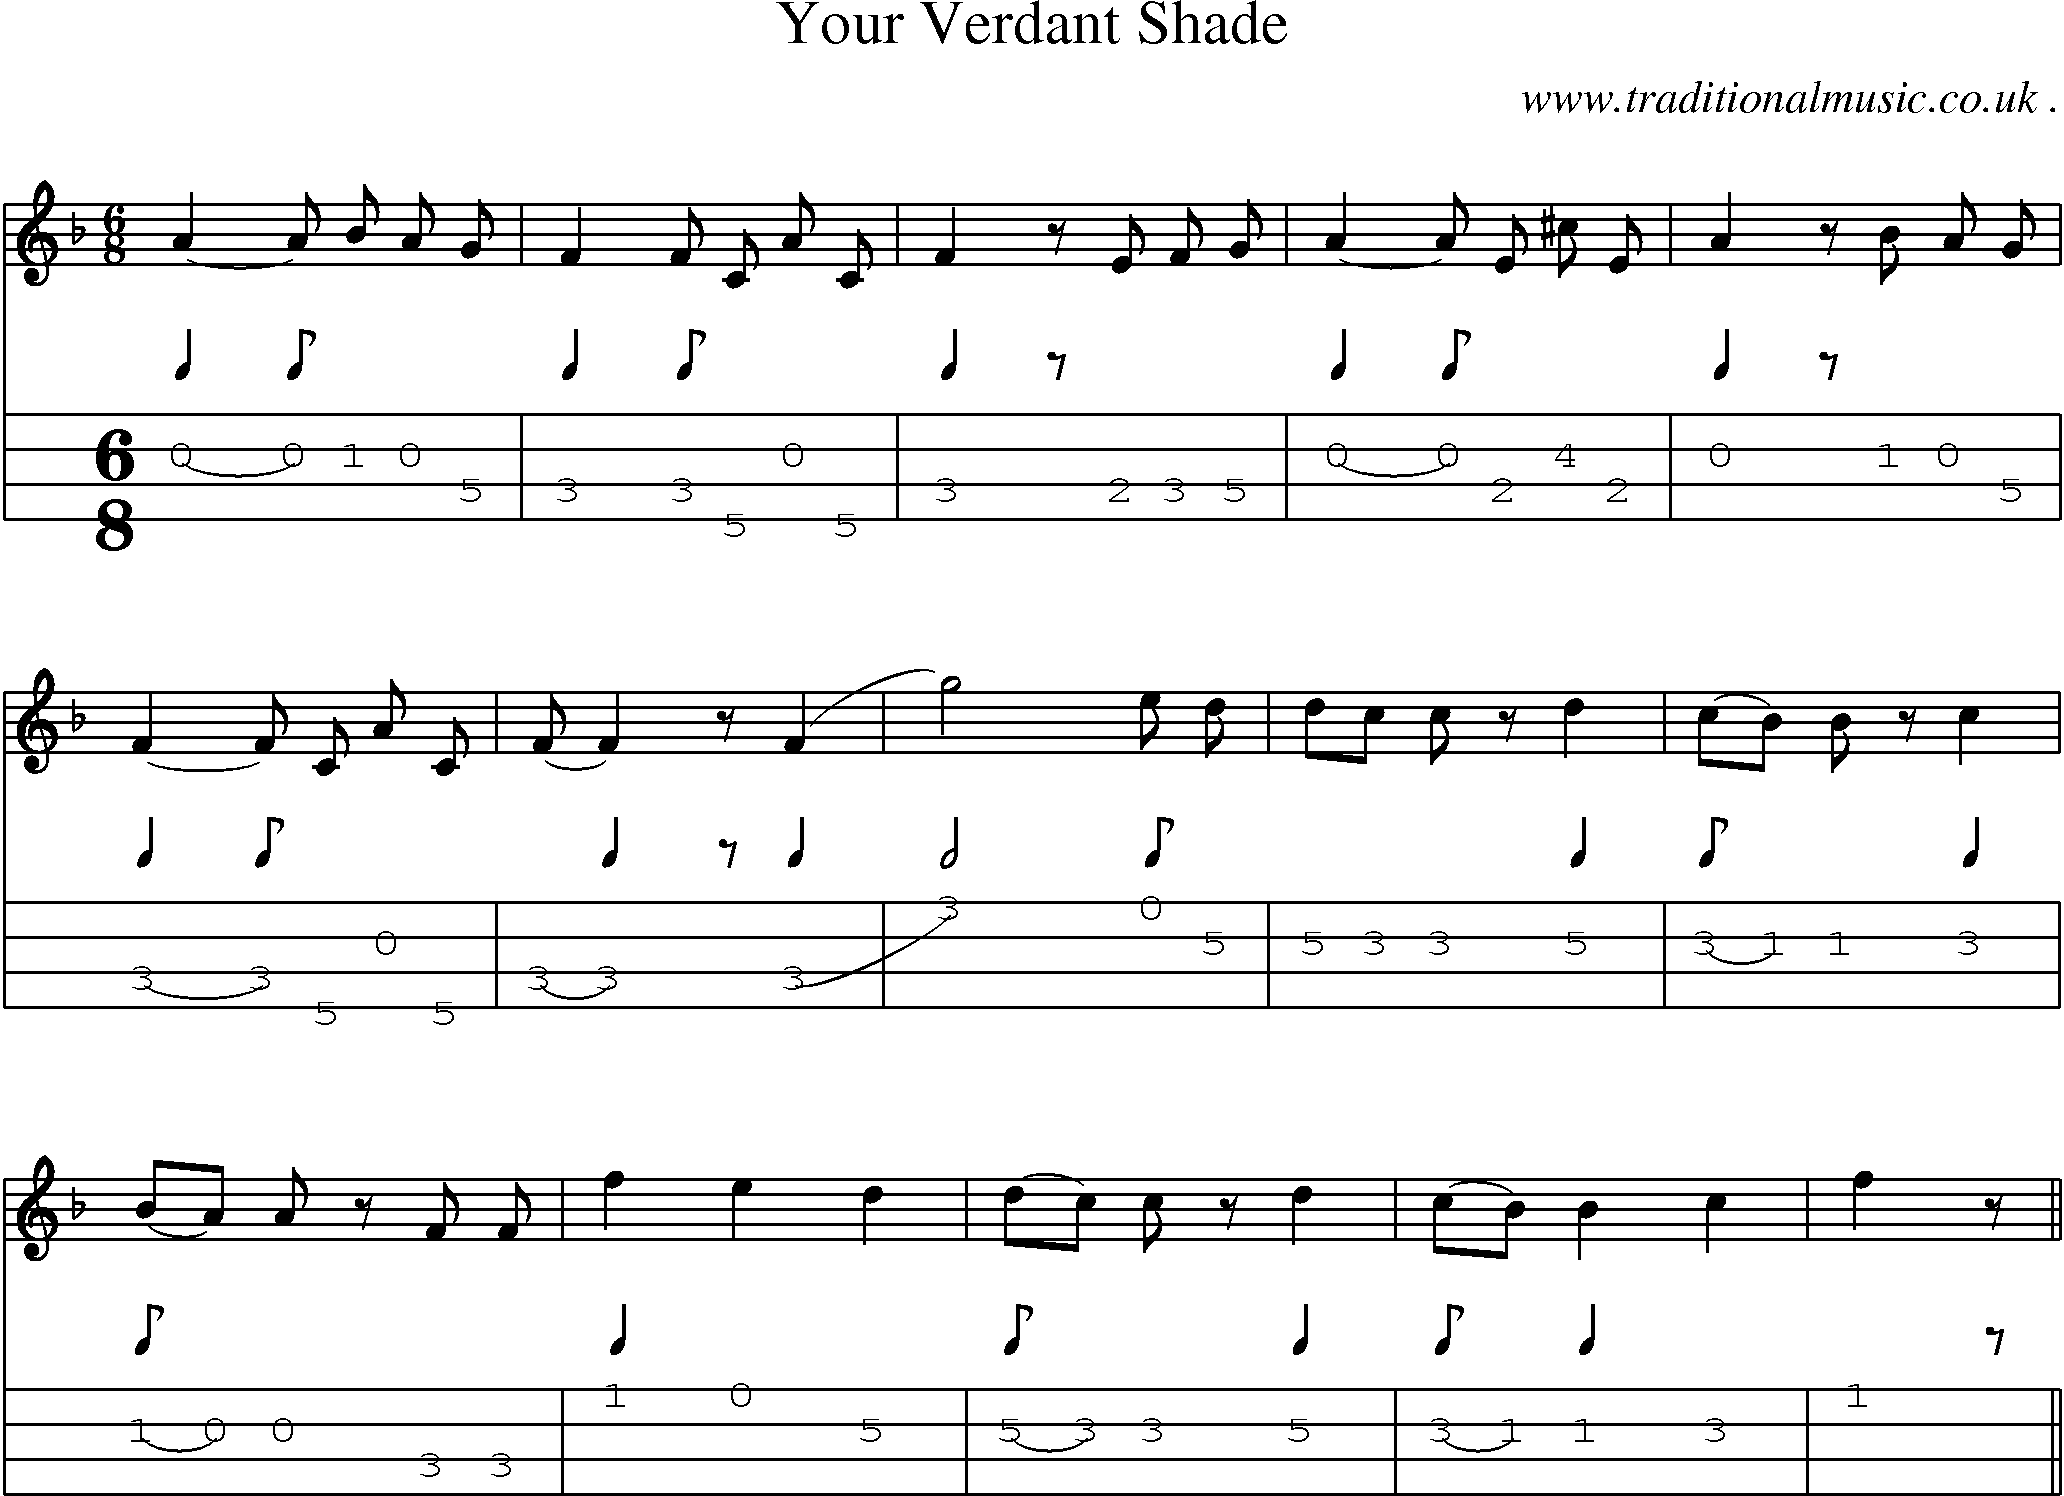 Sheet-Music and Mandolin Tabs for Your Verdant Shade